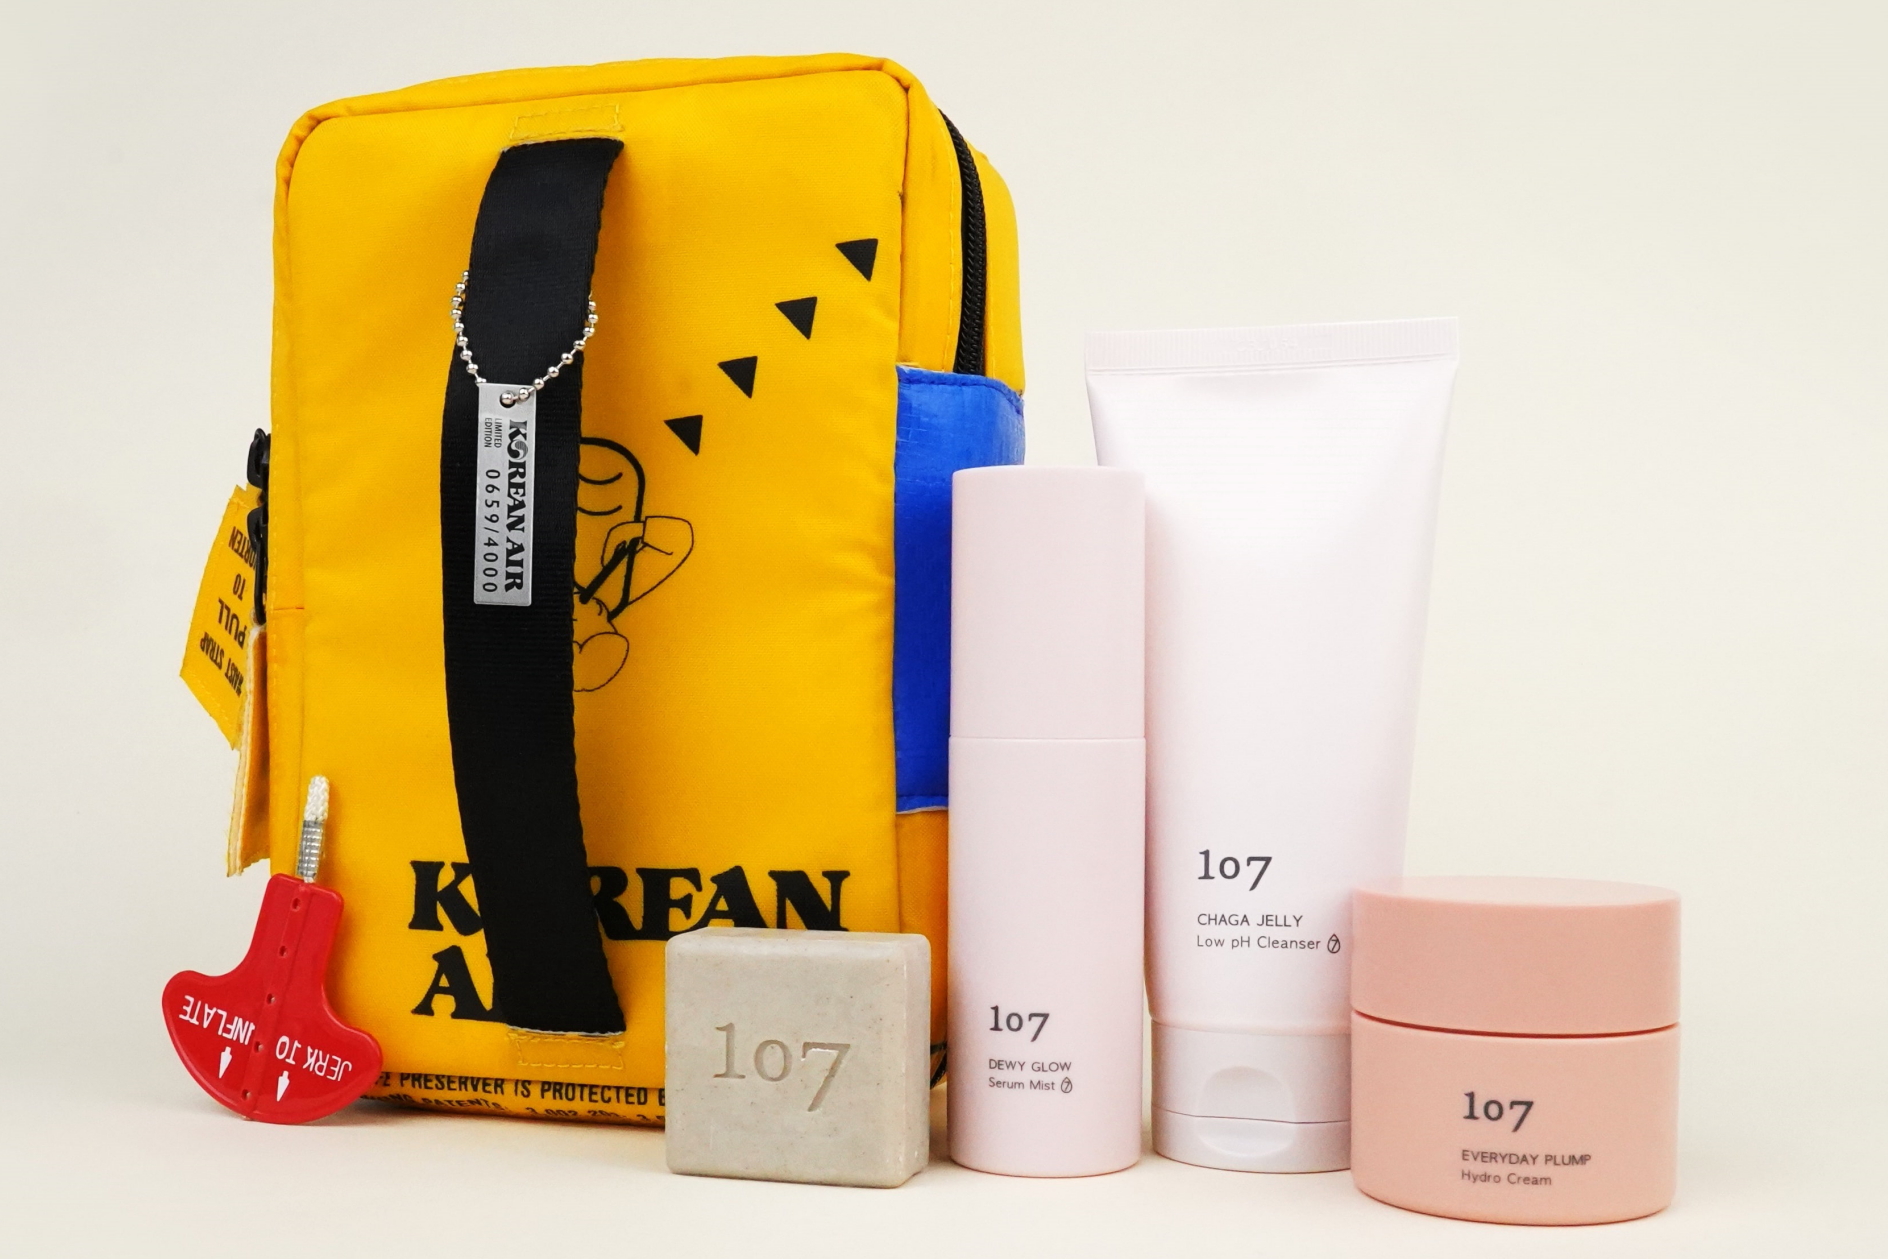 Korean Air has produced cosmetic pouches from retired life vests. Click to enlarge.